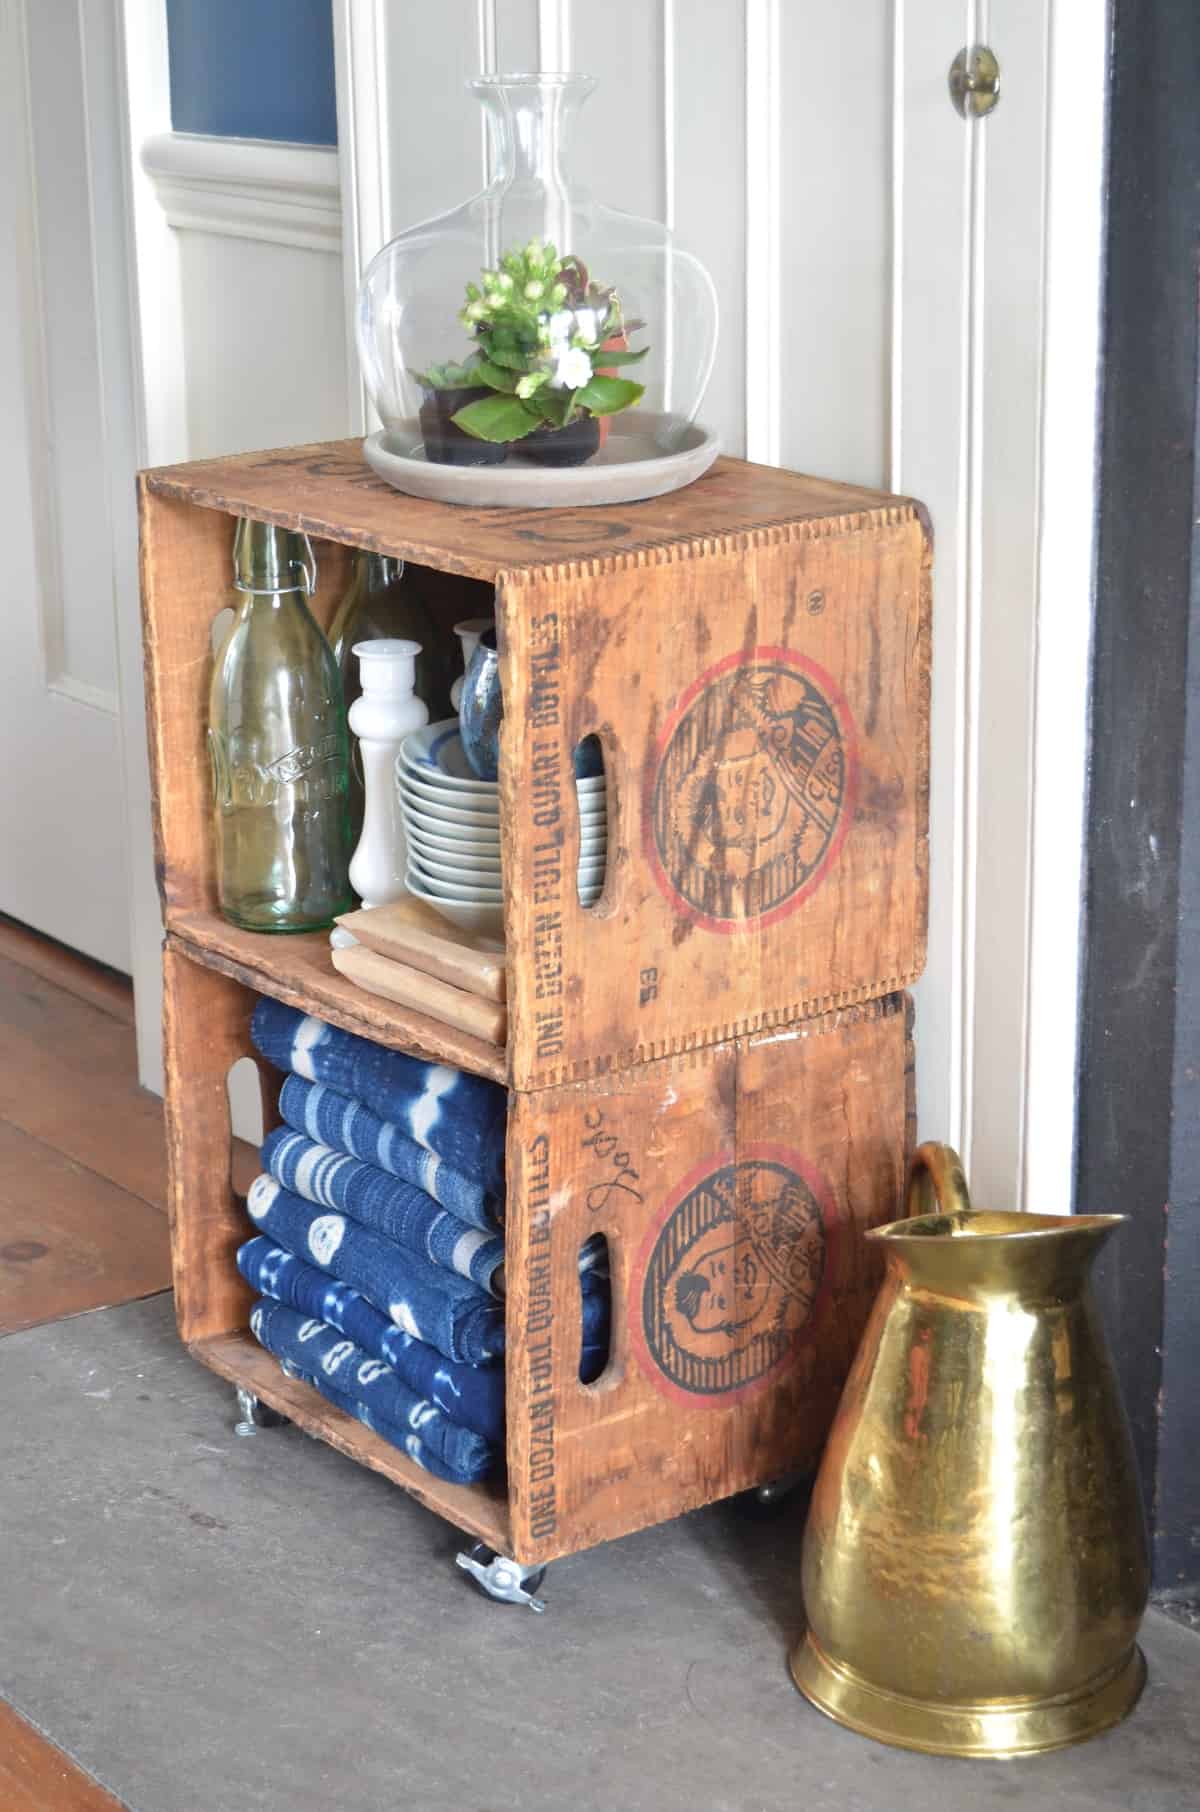 Thrifty storage from flea market crates on casters.